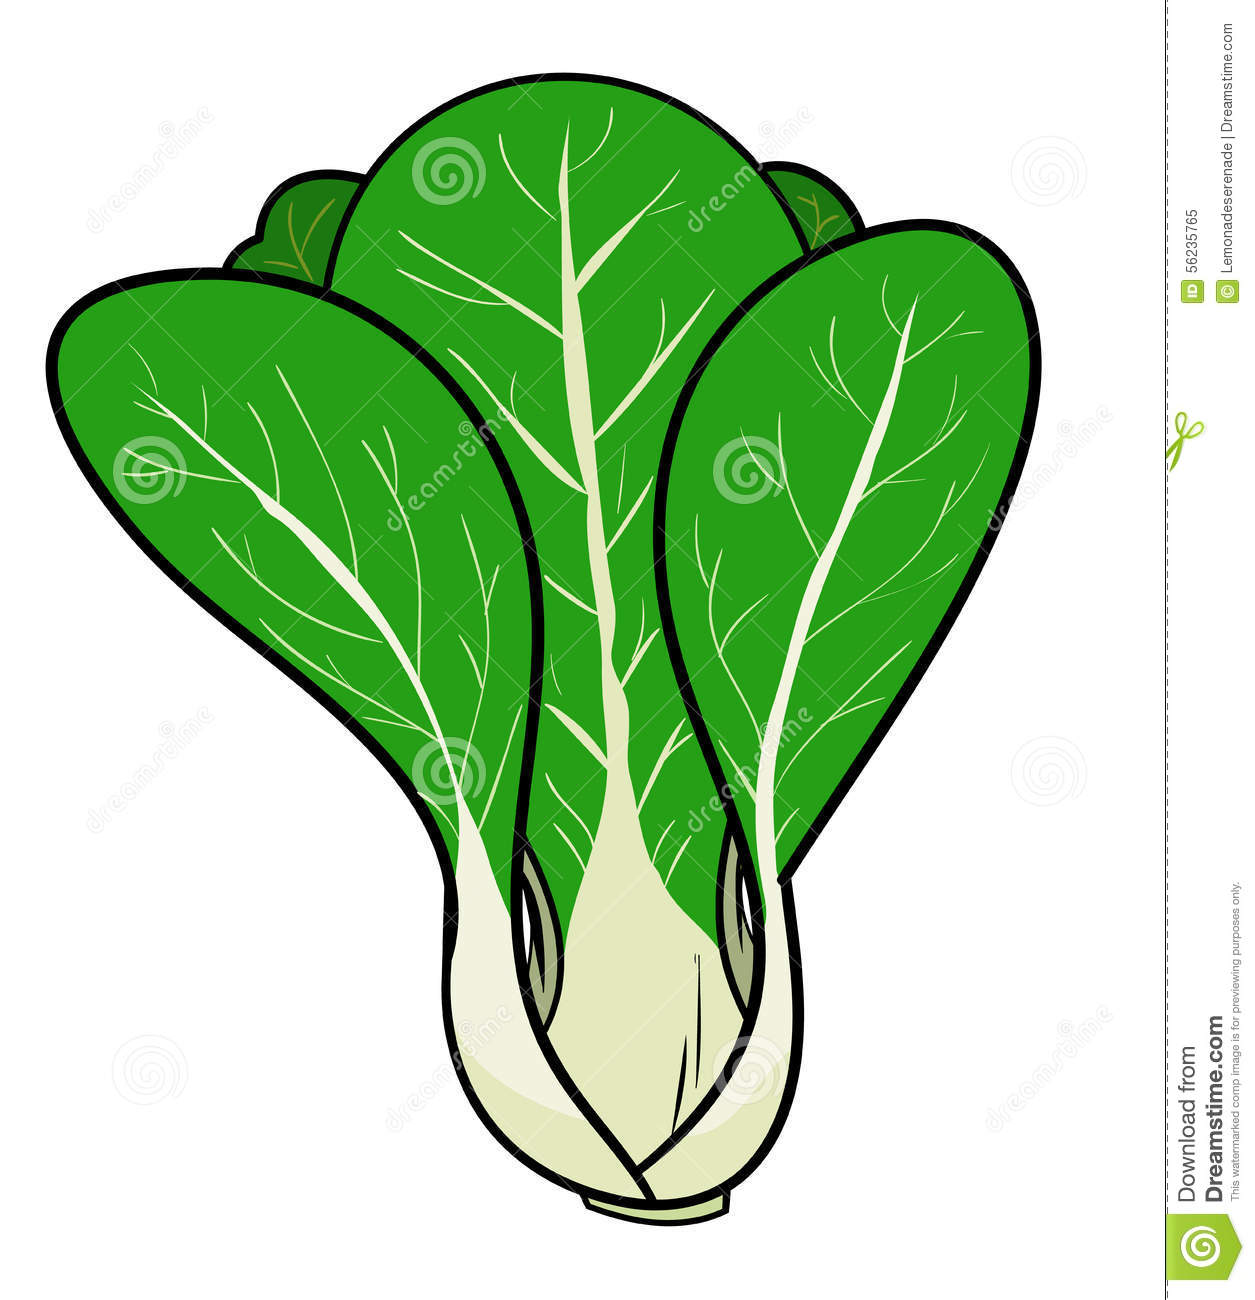 Cabbage clipart sketch #2